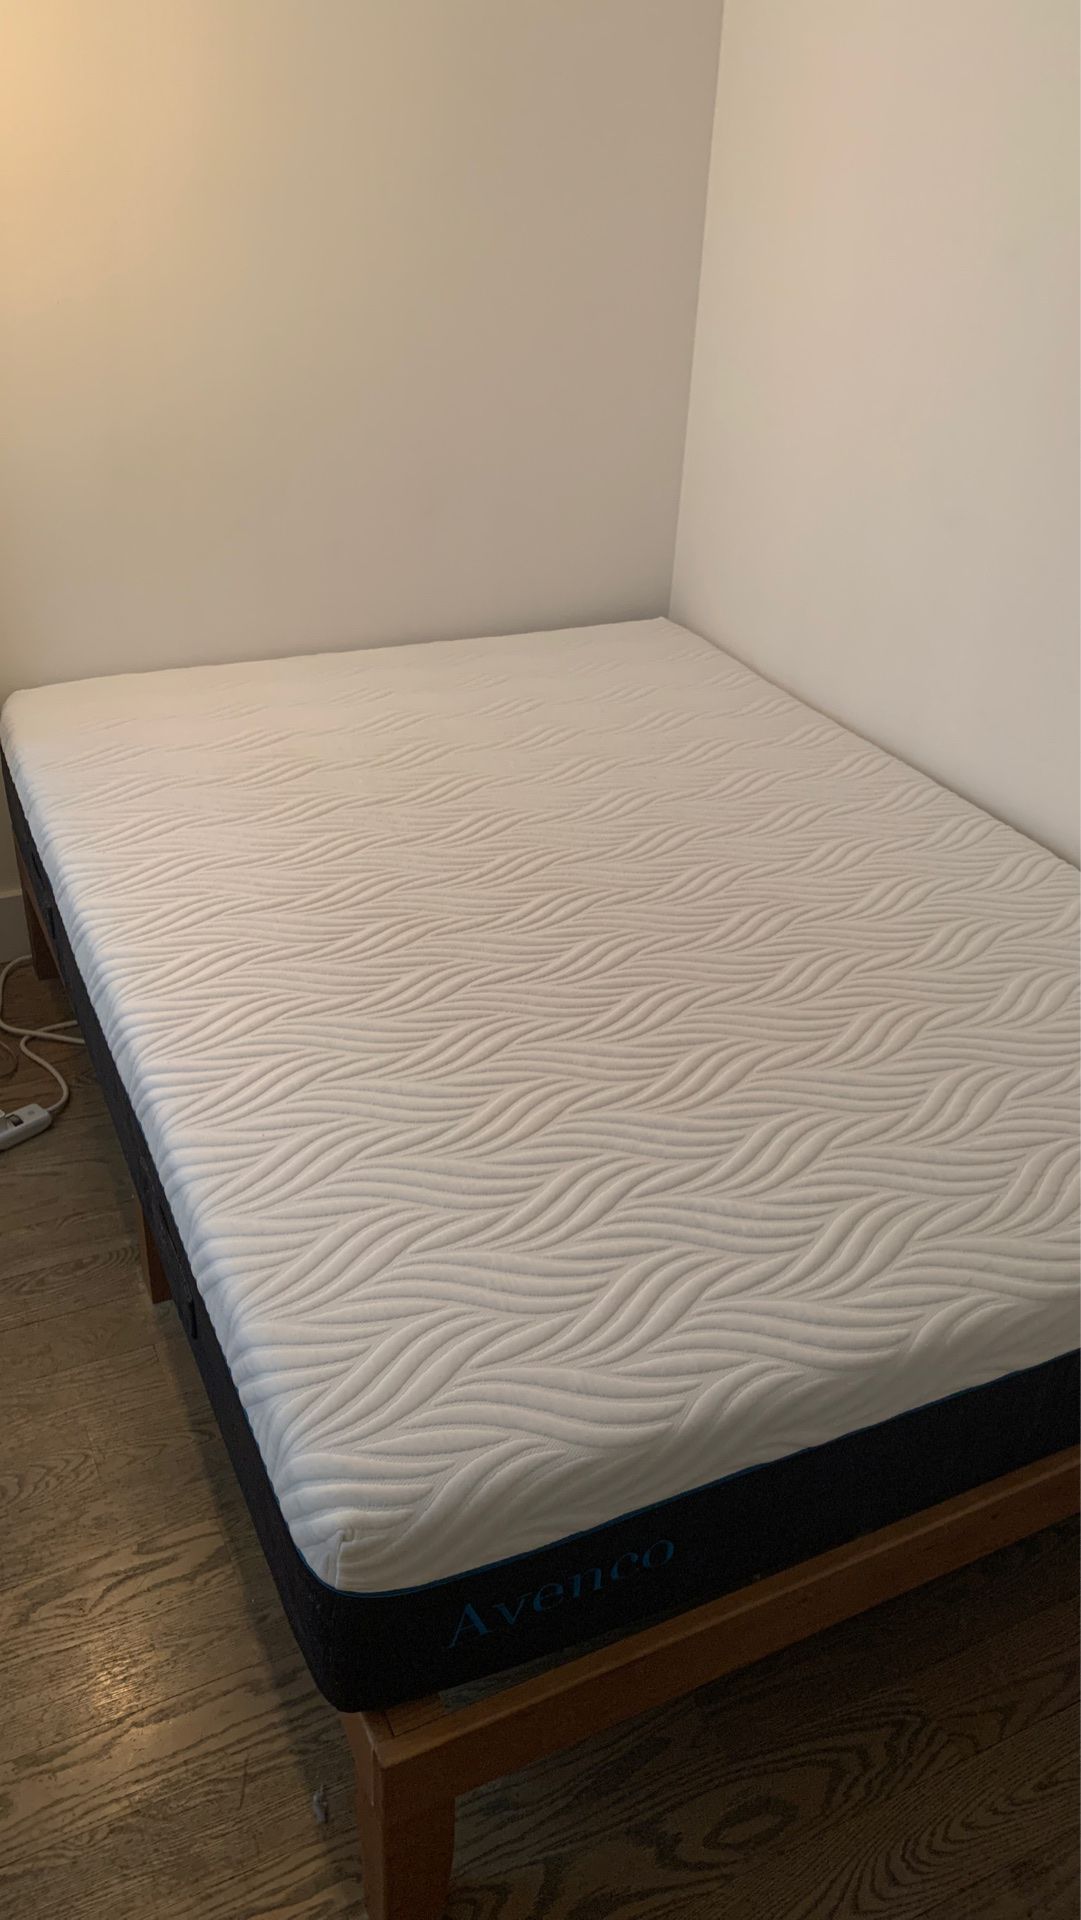 Wooden bed frame and memory foam mattress (size full)